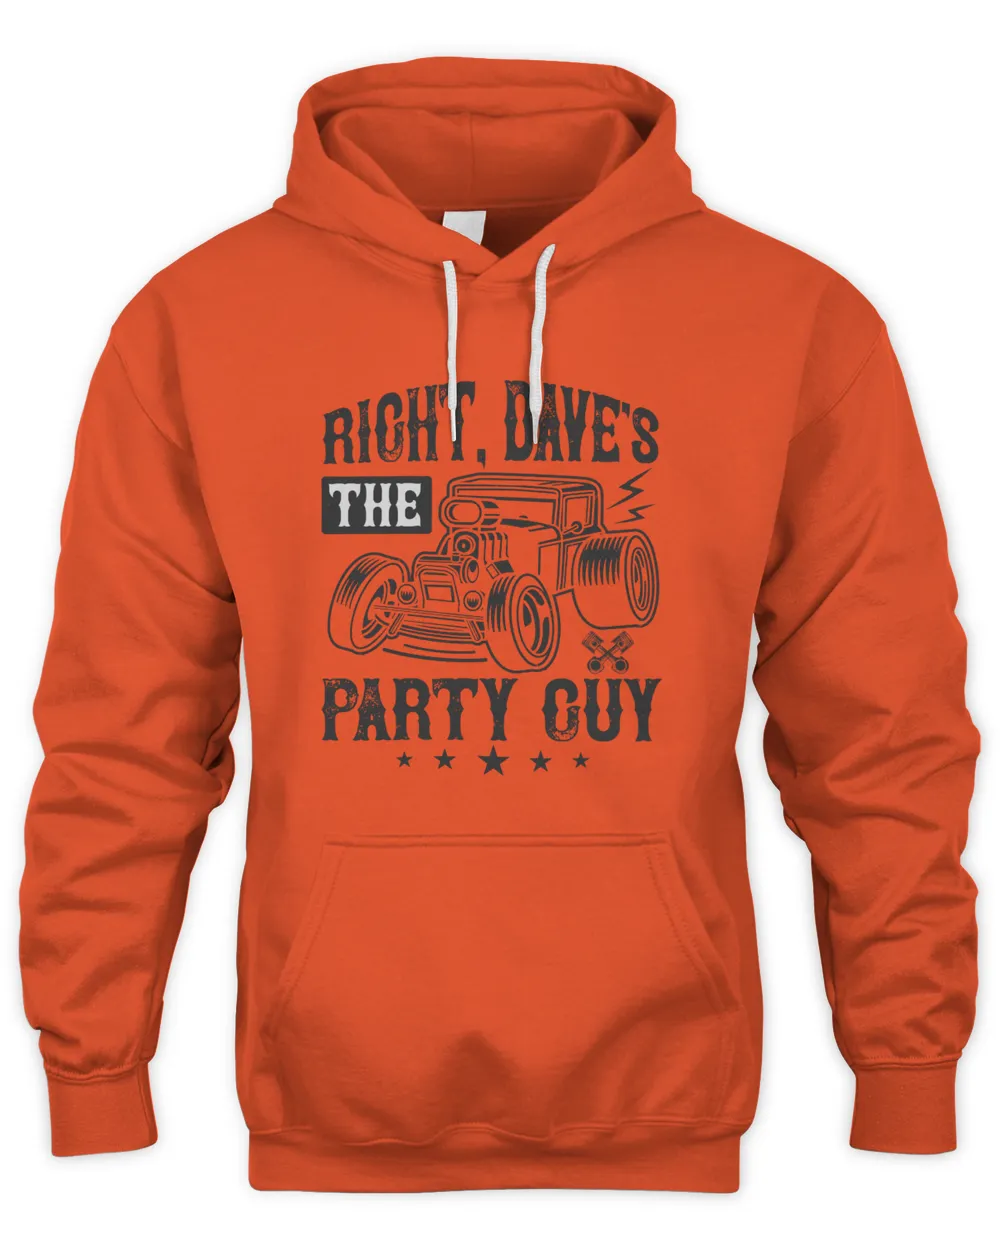 Right, Dave's the party guy-01